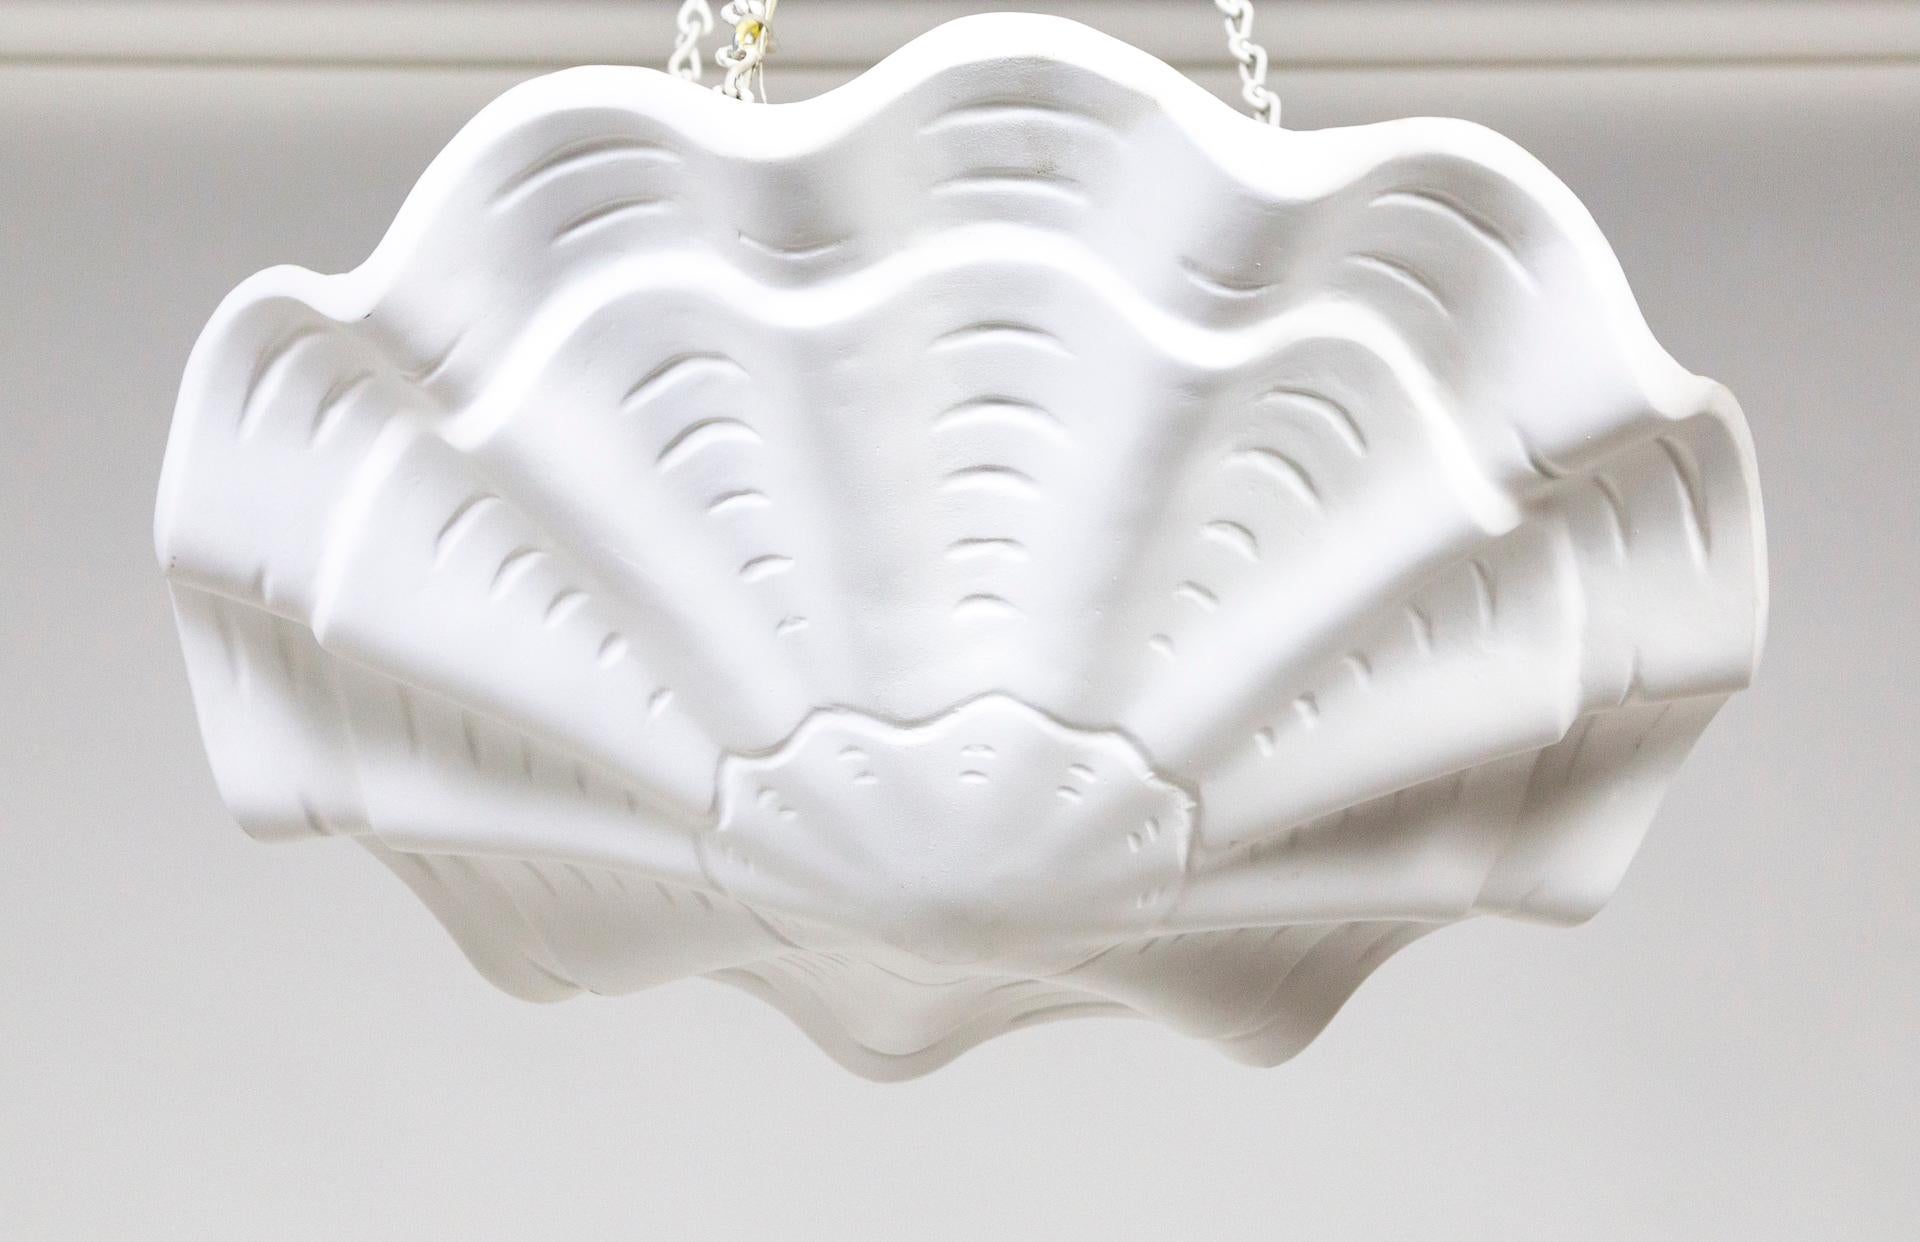 A plaster pendant in an undulating shell shape, with scalloped edges and imprinted lines accentuating the form. Made by Phoenix Day of San Francisco in the 1970s. The original canopy is a decorative gadrooned finial. A newer take on Francis Elkins's